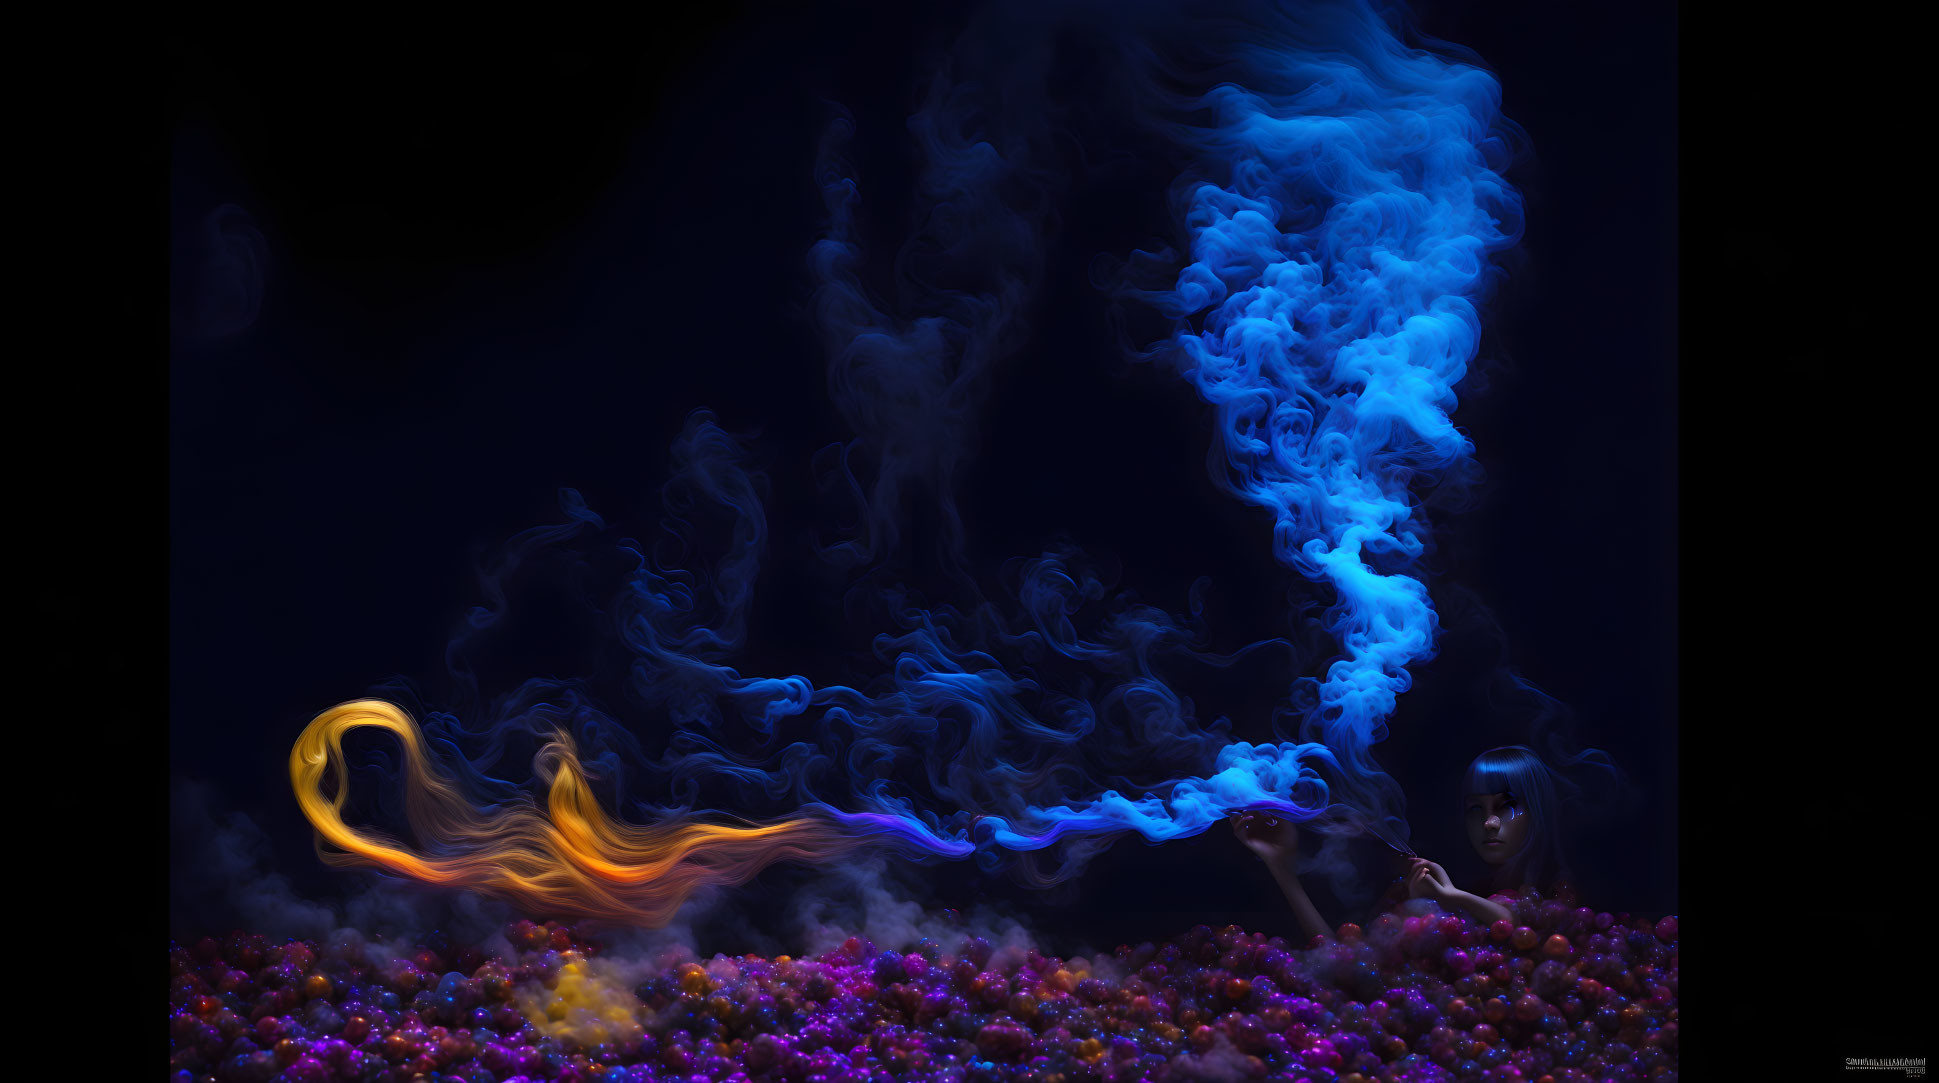 Colorful Smoke Artwork with Partially Visible Woman's Face